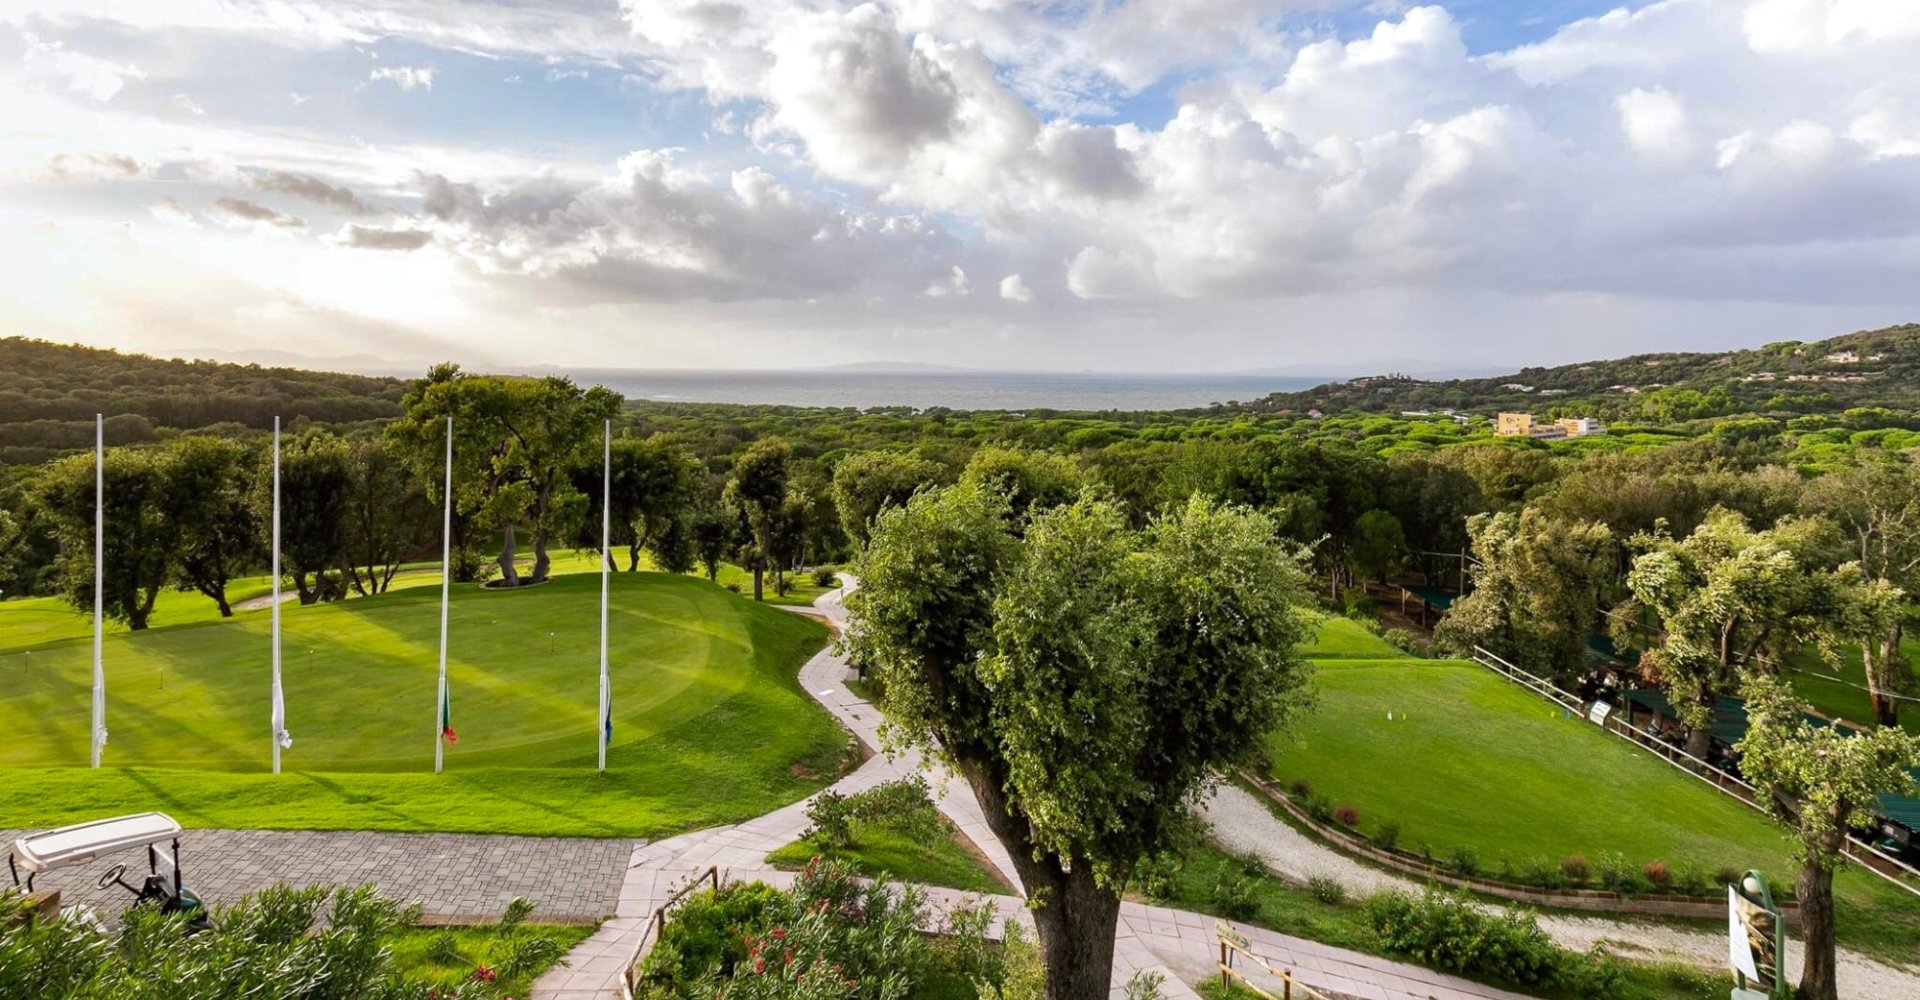 The view from the terrace of the Punta Ala Golf Club